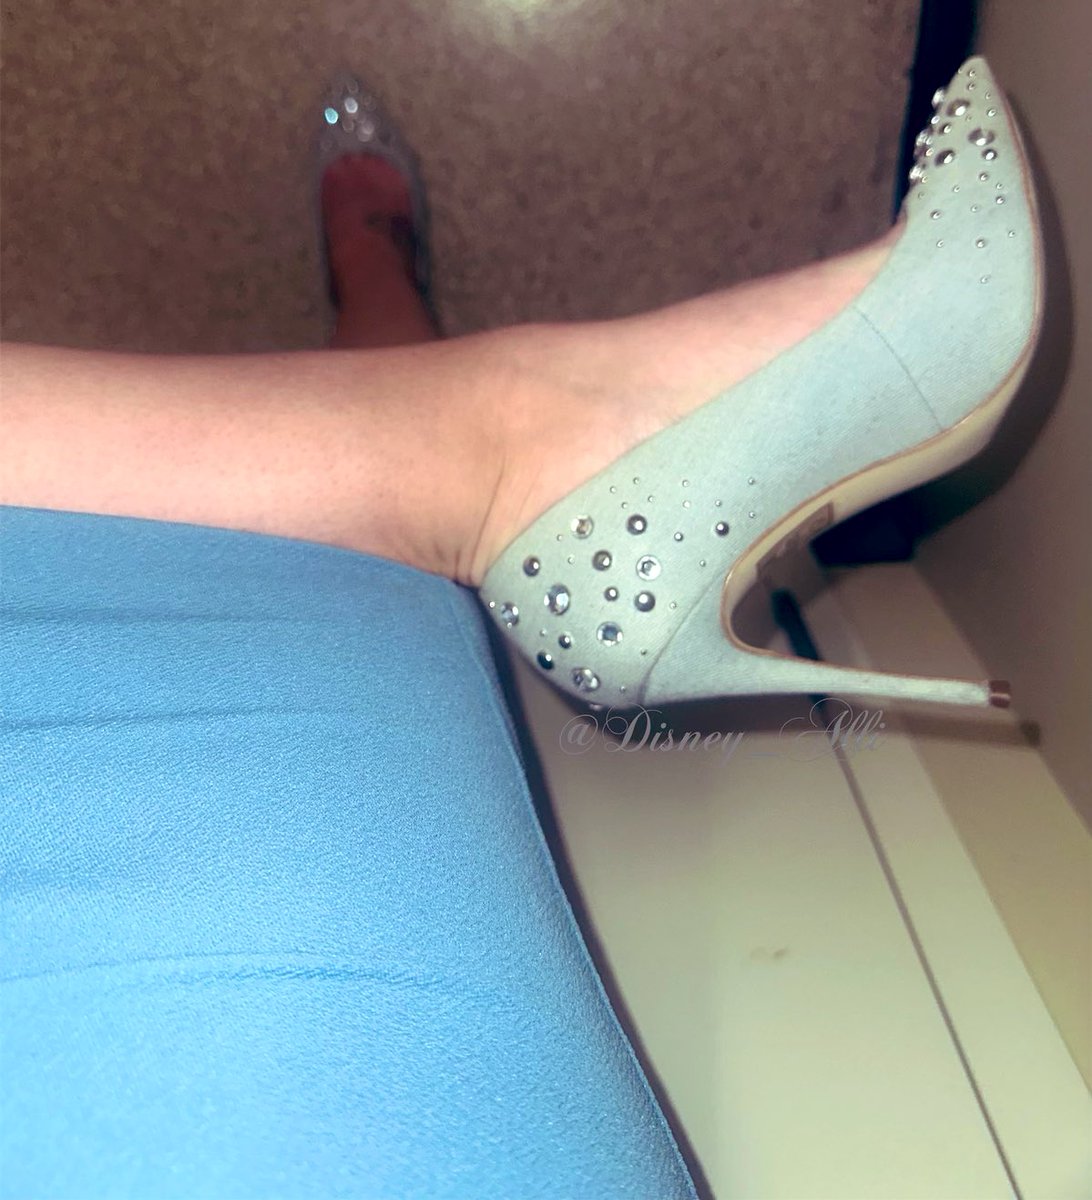 It’s an @aldo_shoes night #shoes #shoefie #shoestagram #shoesoftheday #sotd #outfitoftheday #ootd #highheeledshoes #pumps #highheellife #highheellover #highheeladdict #shoelover #shoefreak #shoeporn #shoewhore #shoeaddict #shoeaholic #shoeaddiction #heelsporn #heels #showoff